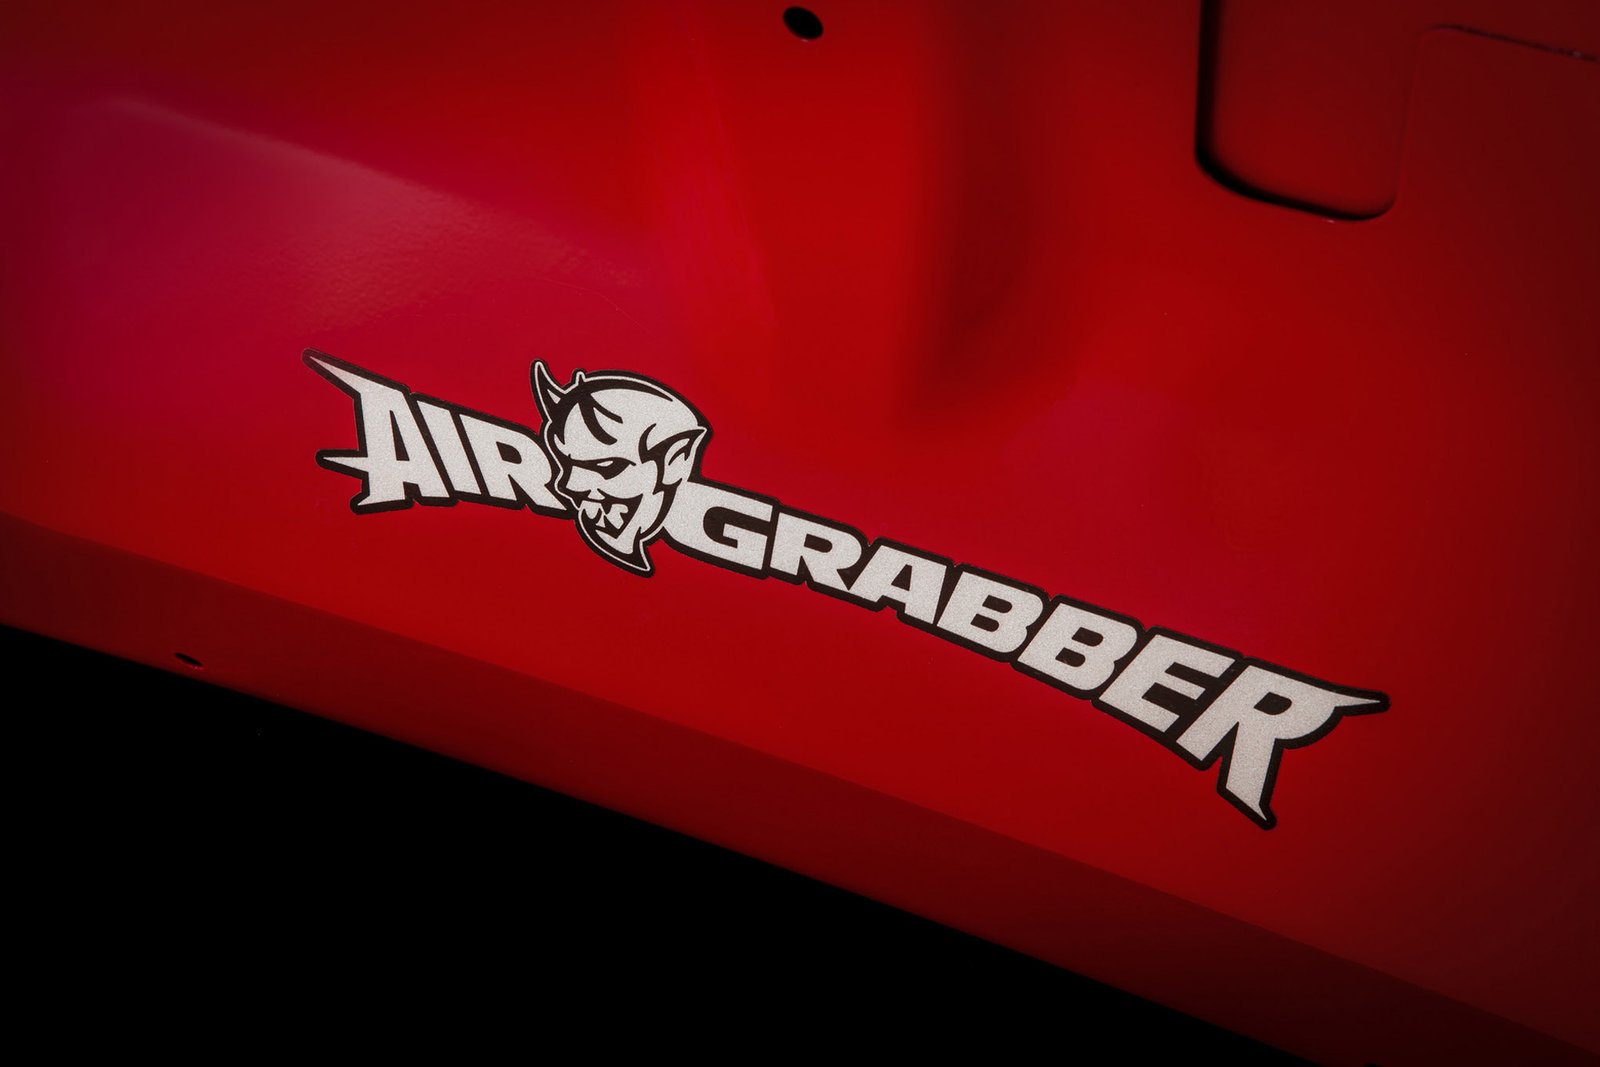 The Air Grabber logo on the underside of the hood of the 2018 Do